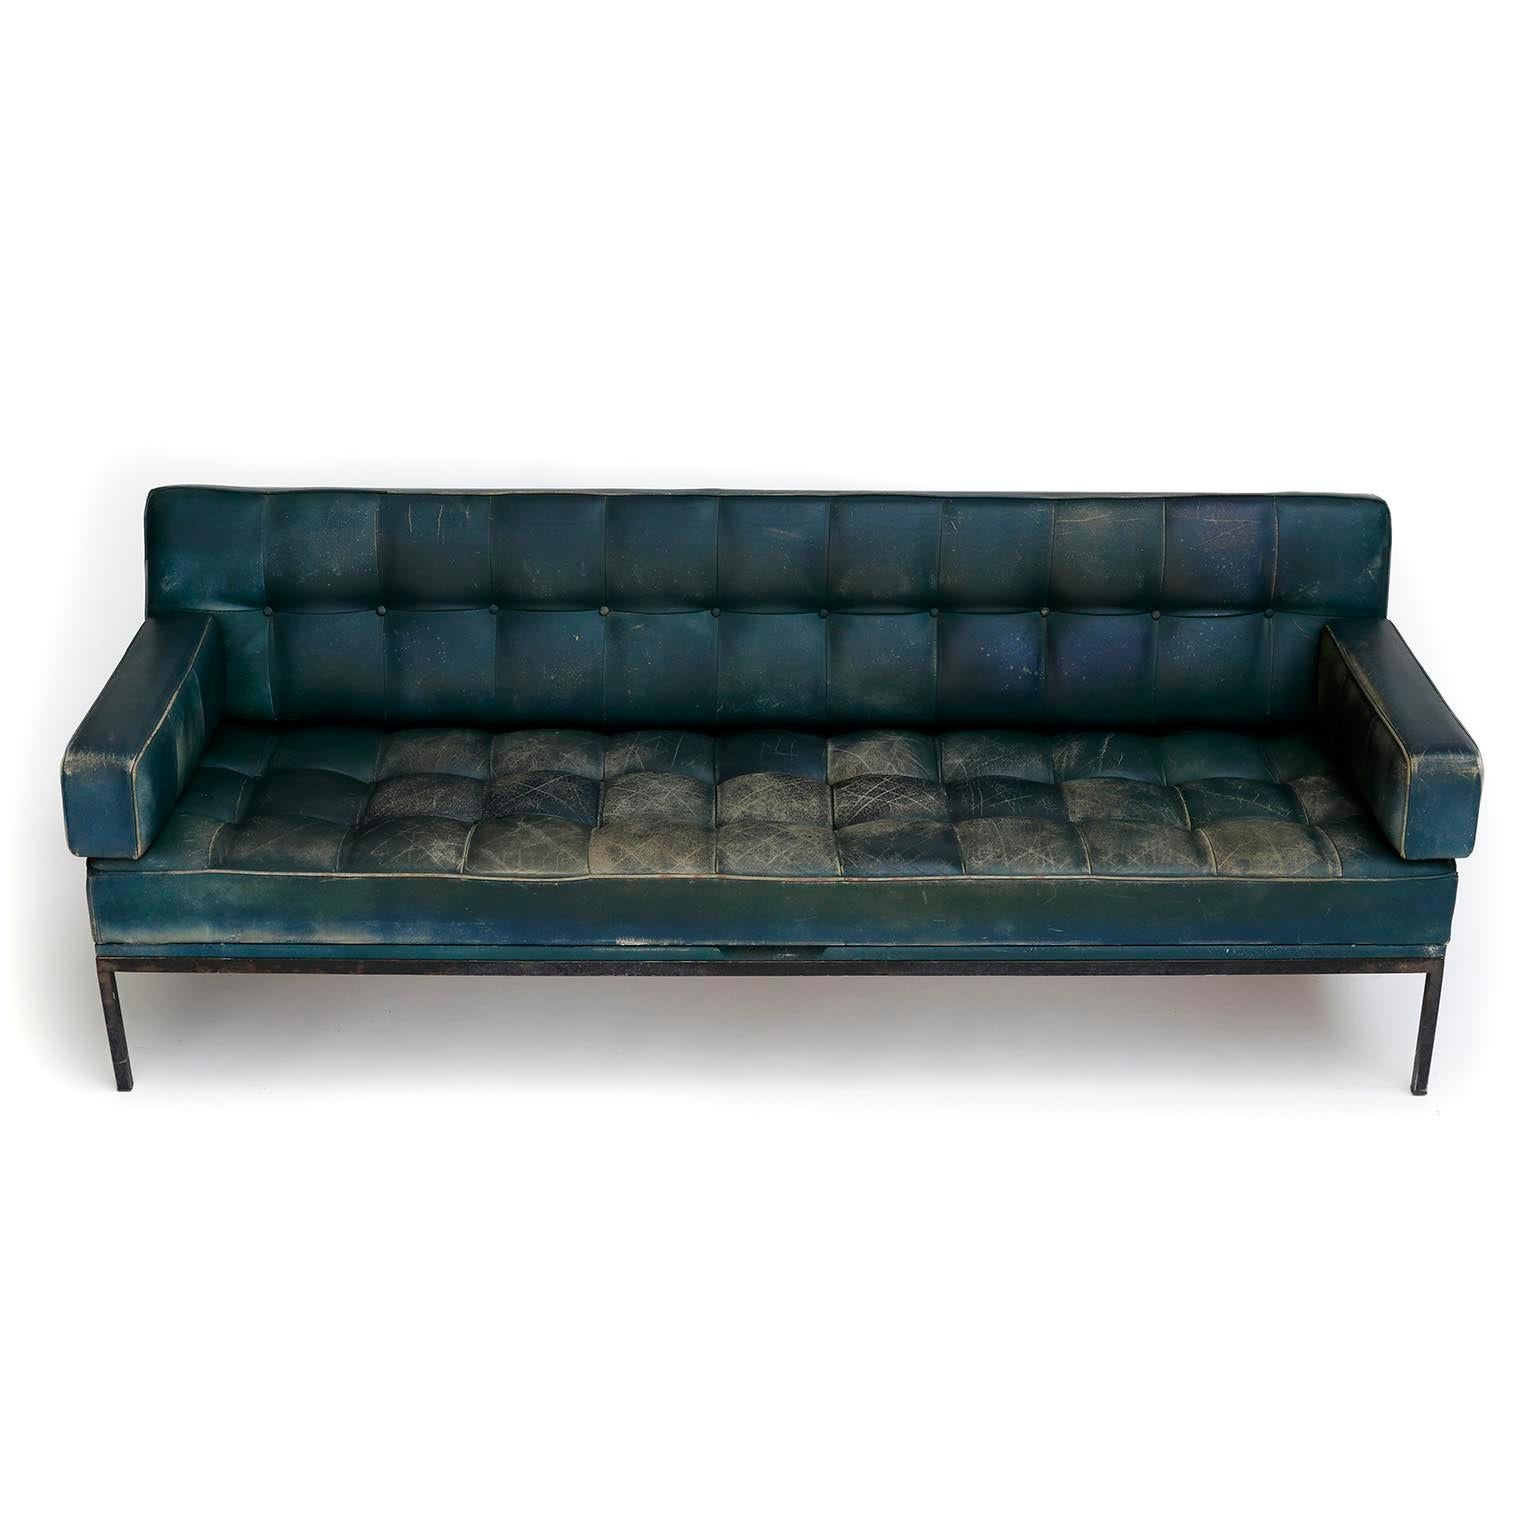 Mid-Century Modern Johannes Spalt 'Constanze' Sofa Daybed Armrests, Patinated Green Leather, 1960s